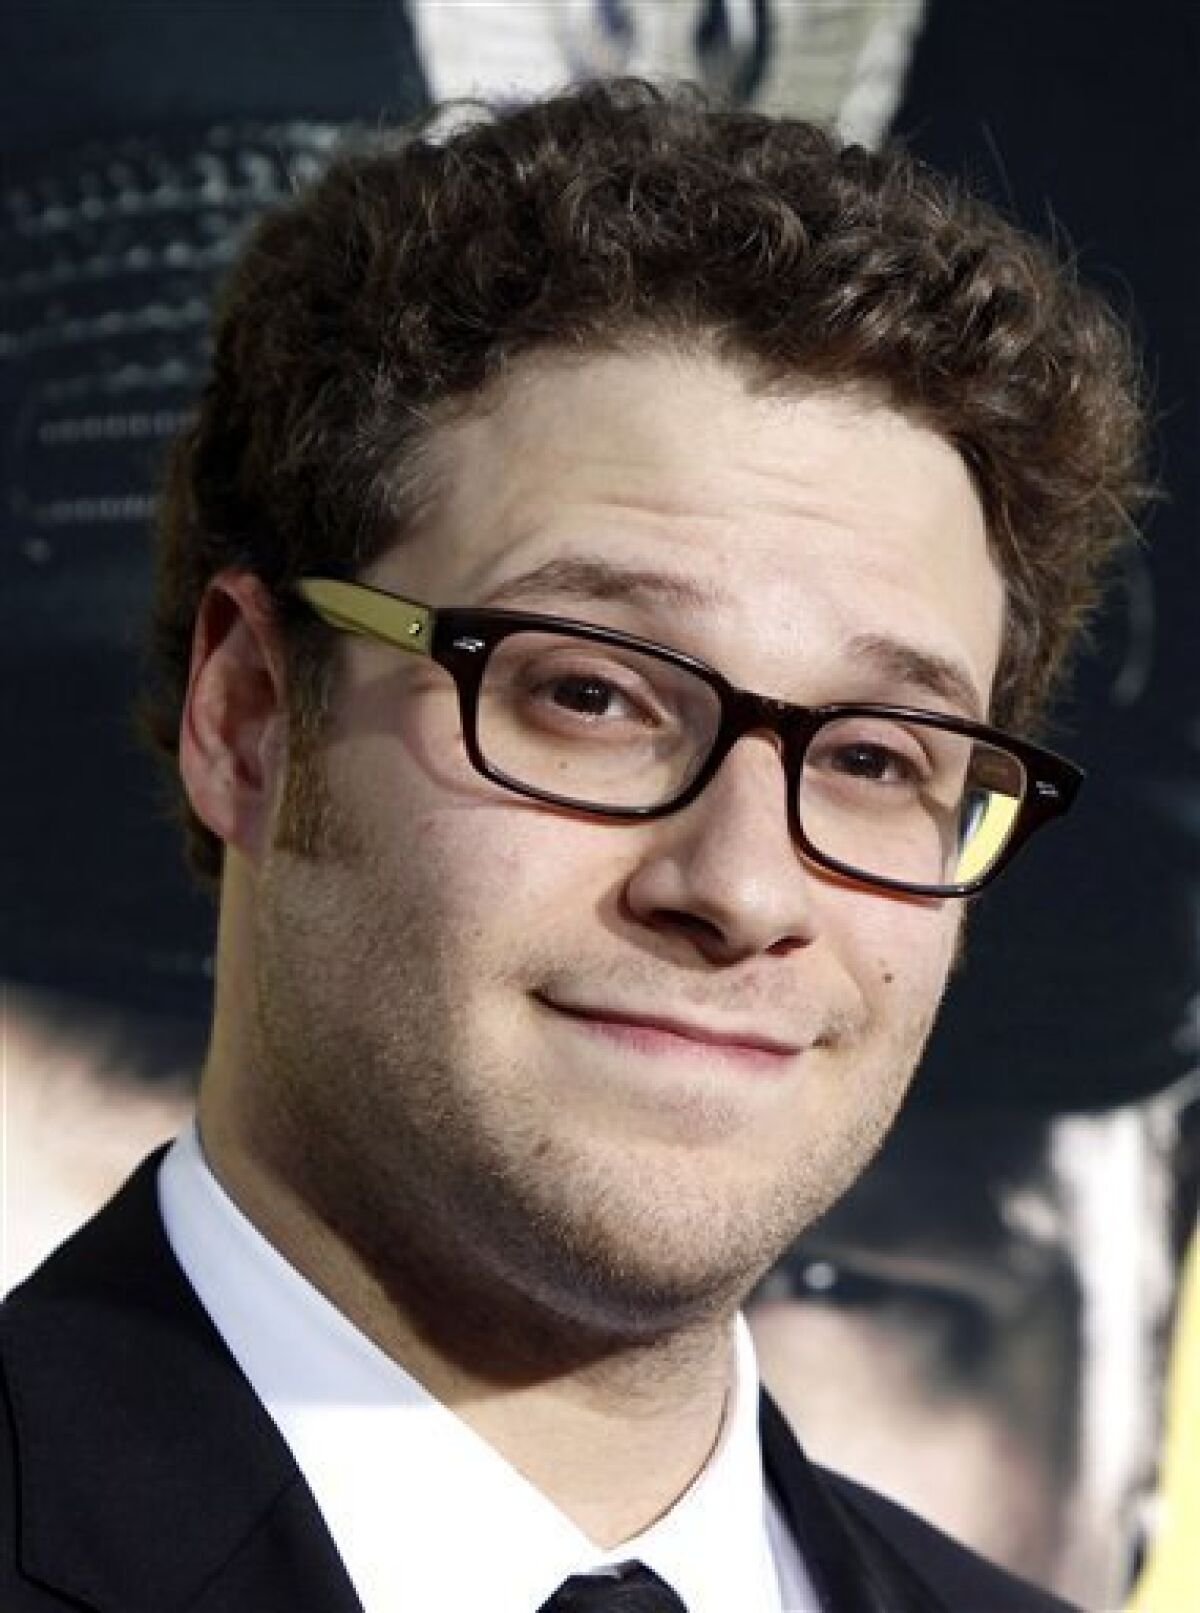 FILE - In this April 6, 2009 file photo Seth Rogen arrives at the premiere of "Observe and Report" in Los Angeles. (AP Photo/Matt Sayles, file)